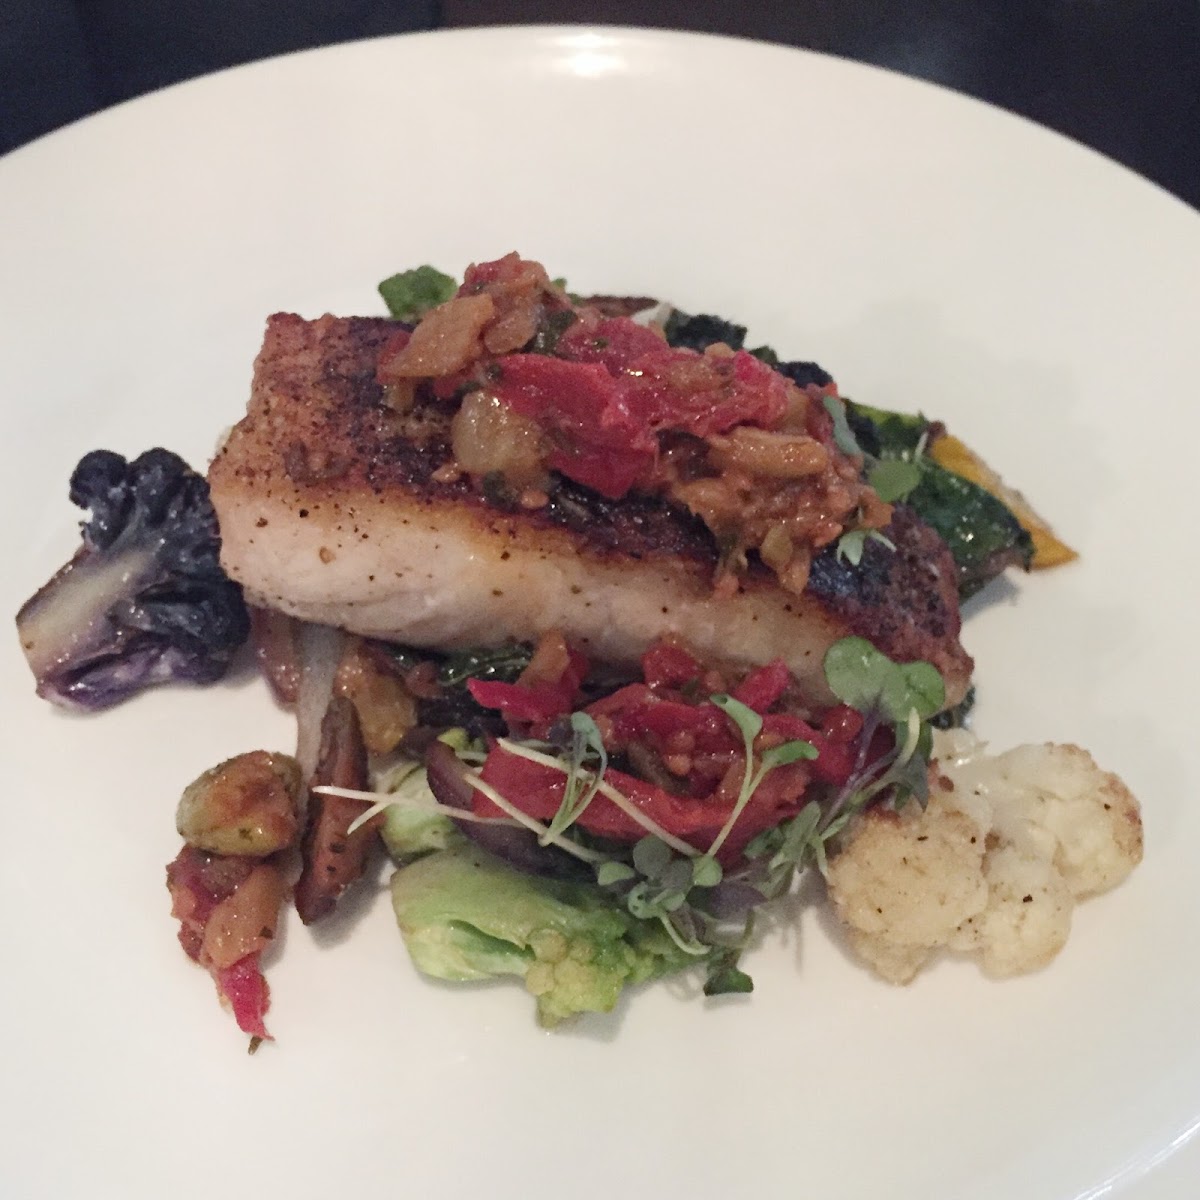 The pan seared sea bass was delicious and beautifully presented during restaurant week.